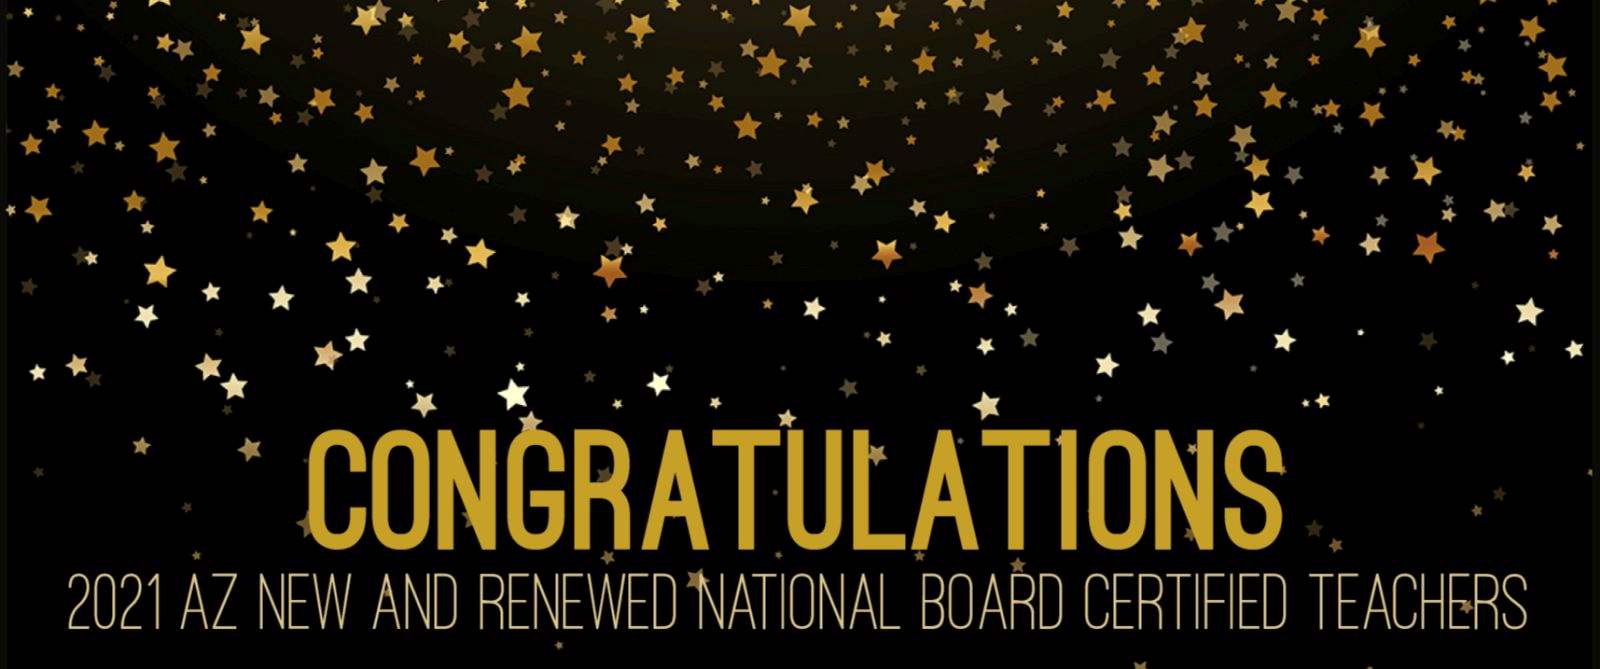 Arizona Celebrates 68 New, 101 Renewed or Maintained NBCTs in 2021